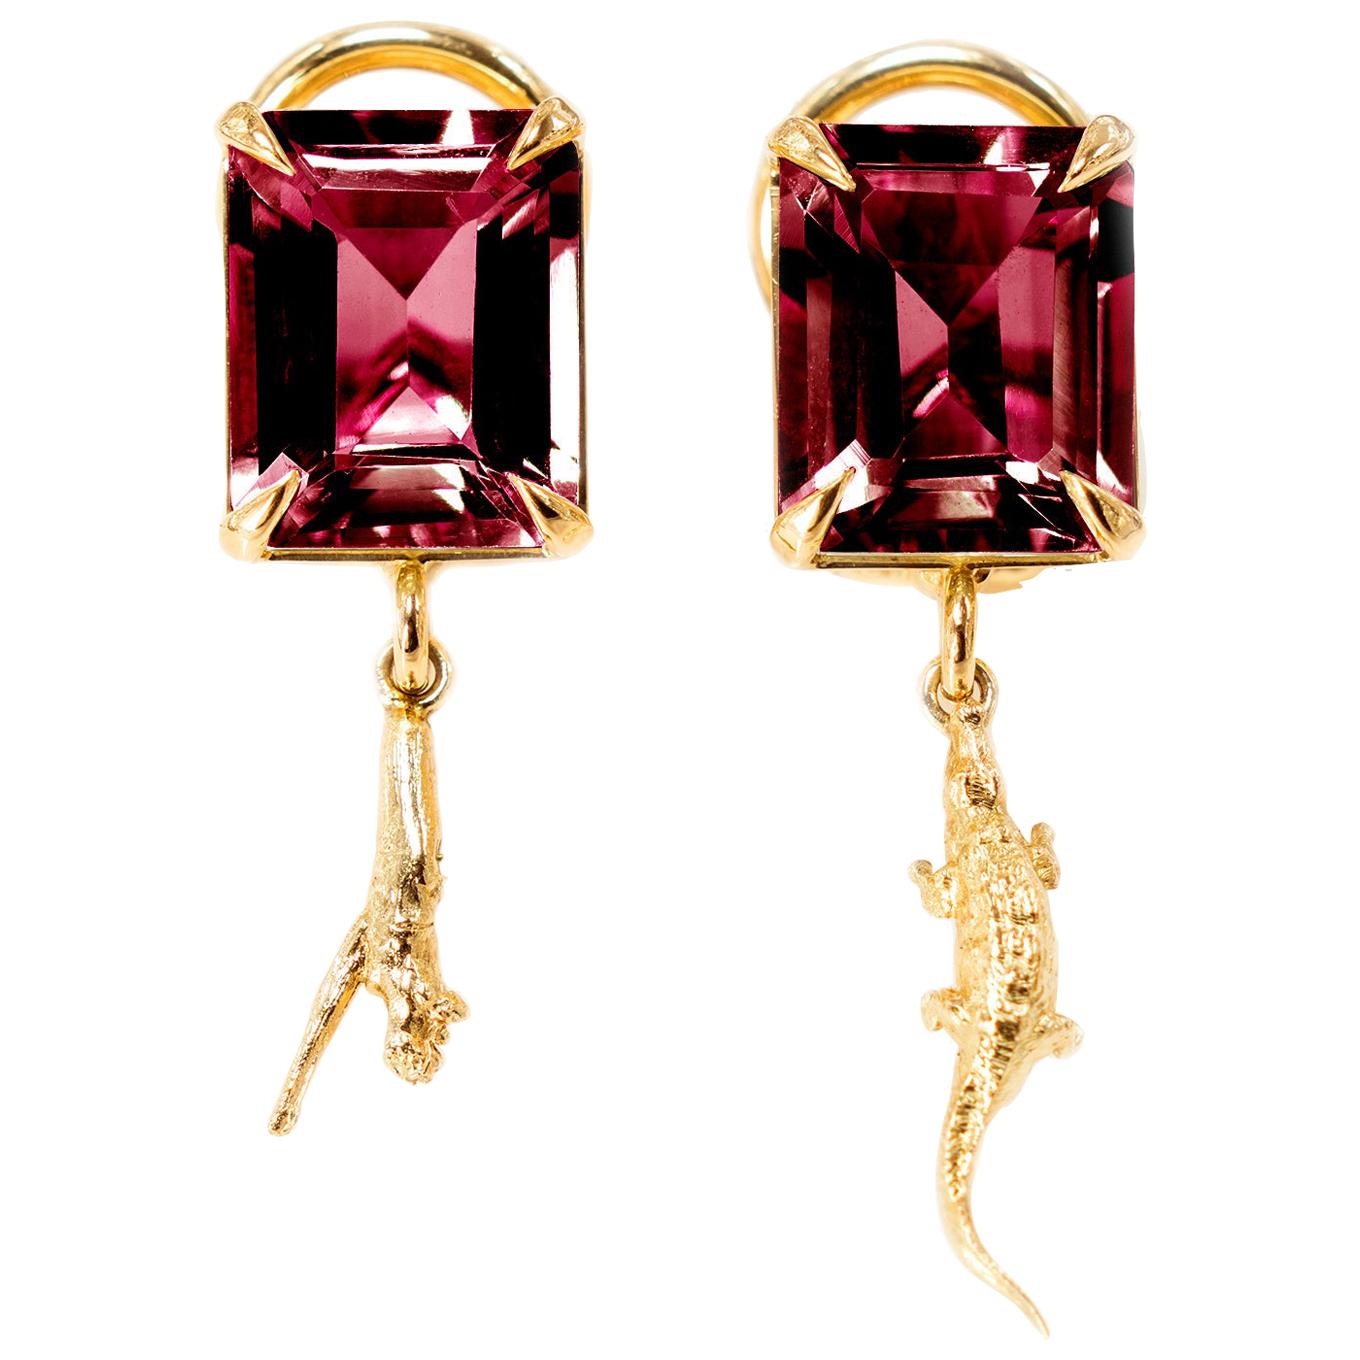 Yellow Gold Mesopotamia Clip-On Earrings by Artist with Rhodolite Garnet For Sale 2